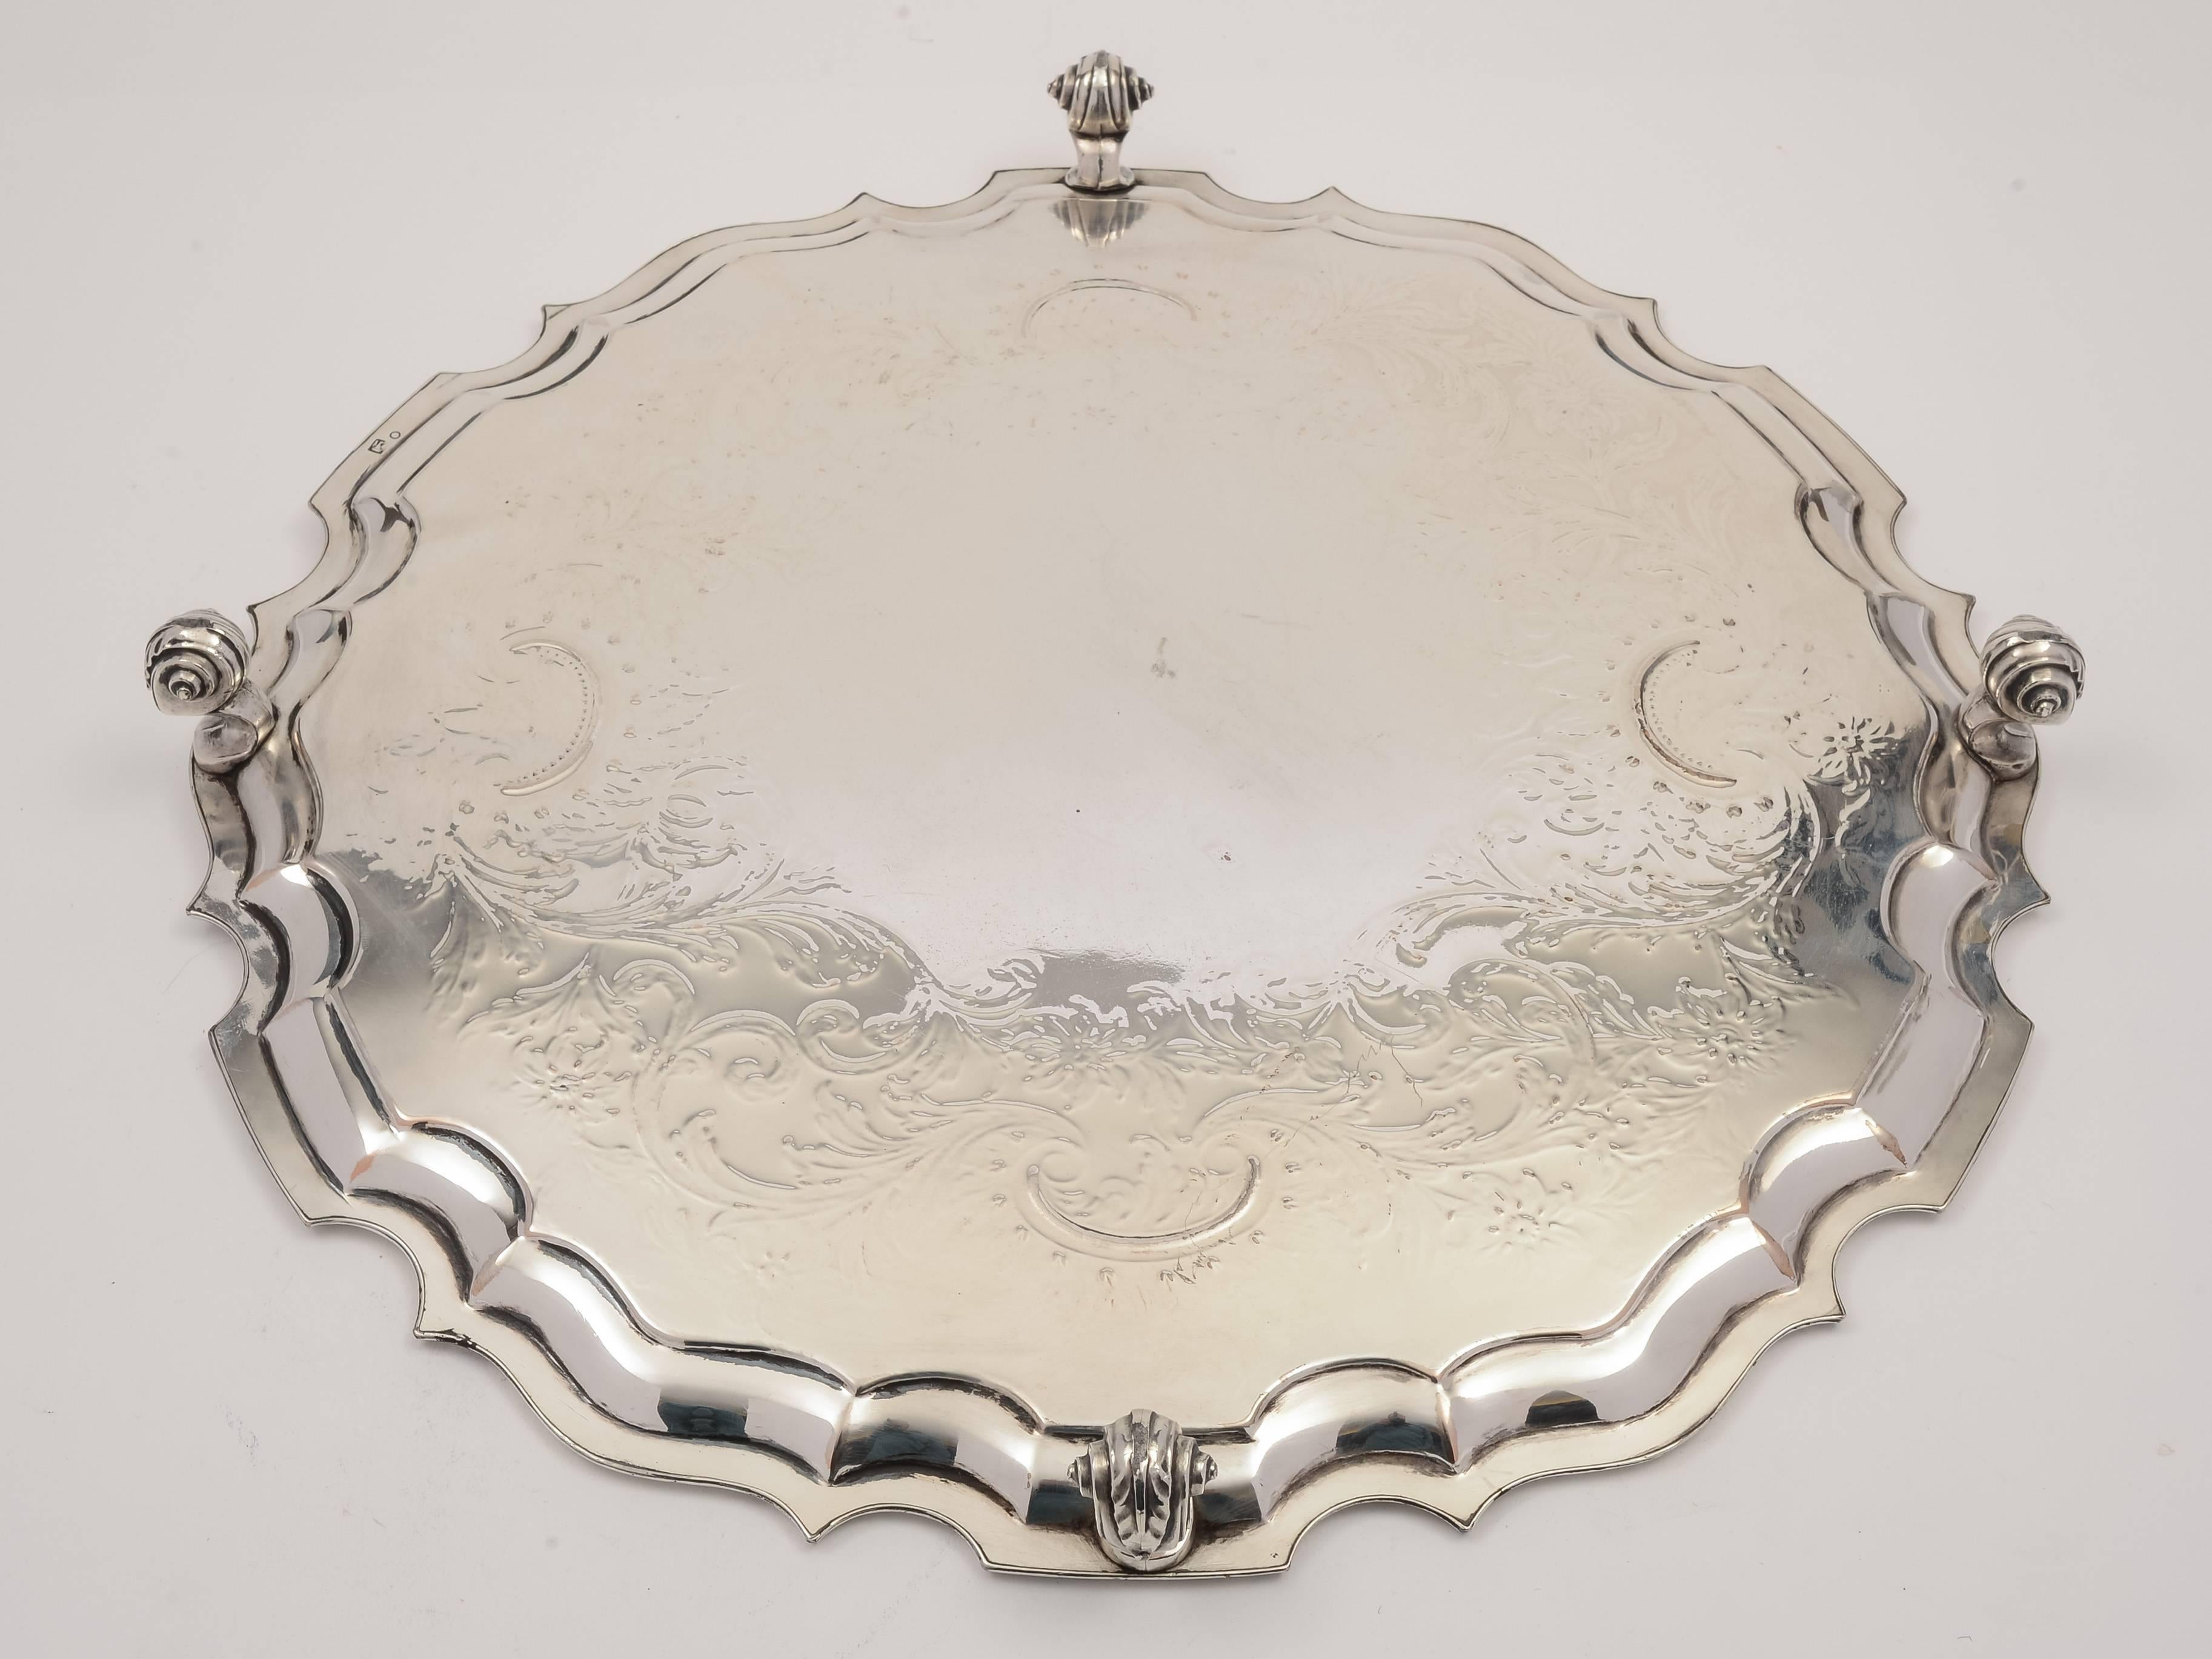 A very nice, large English Sheffield plated salver with engraved foliate design and pie crust decoration to the edge, stands on scroll feet. Has the phoenix mark for John Waterhouse and E. Hatfield & Co (1836-1846).

A beautiful period piece in